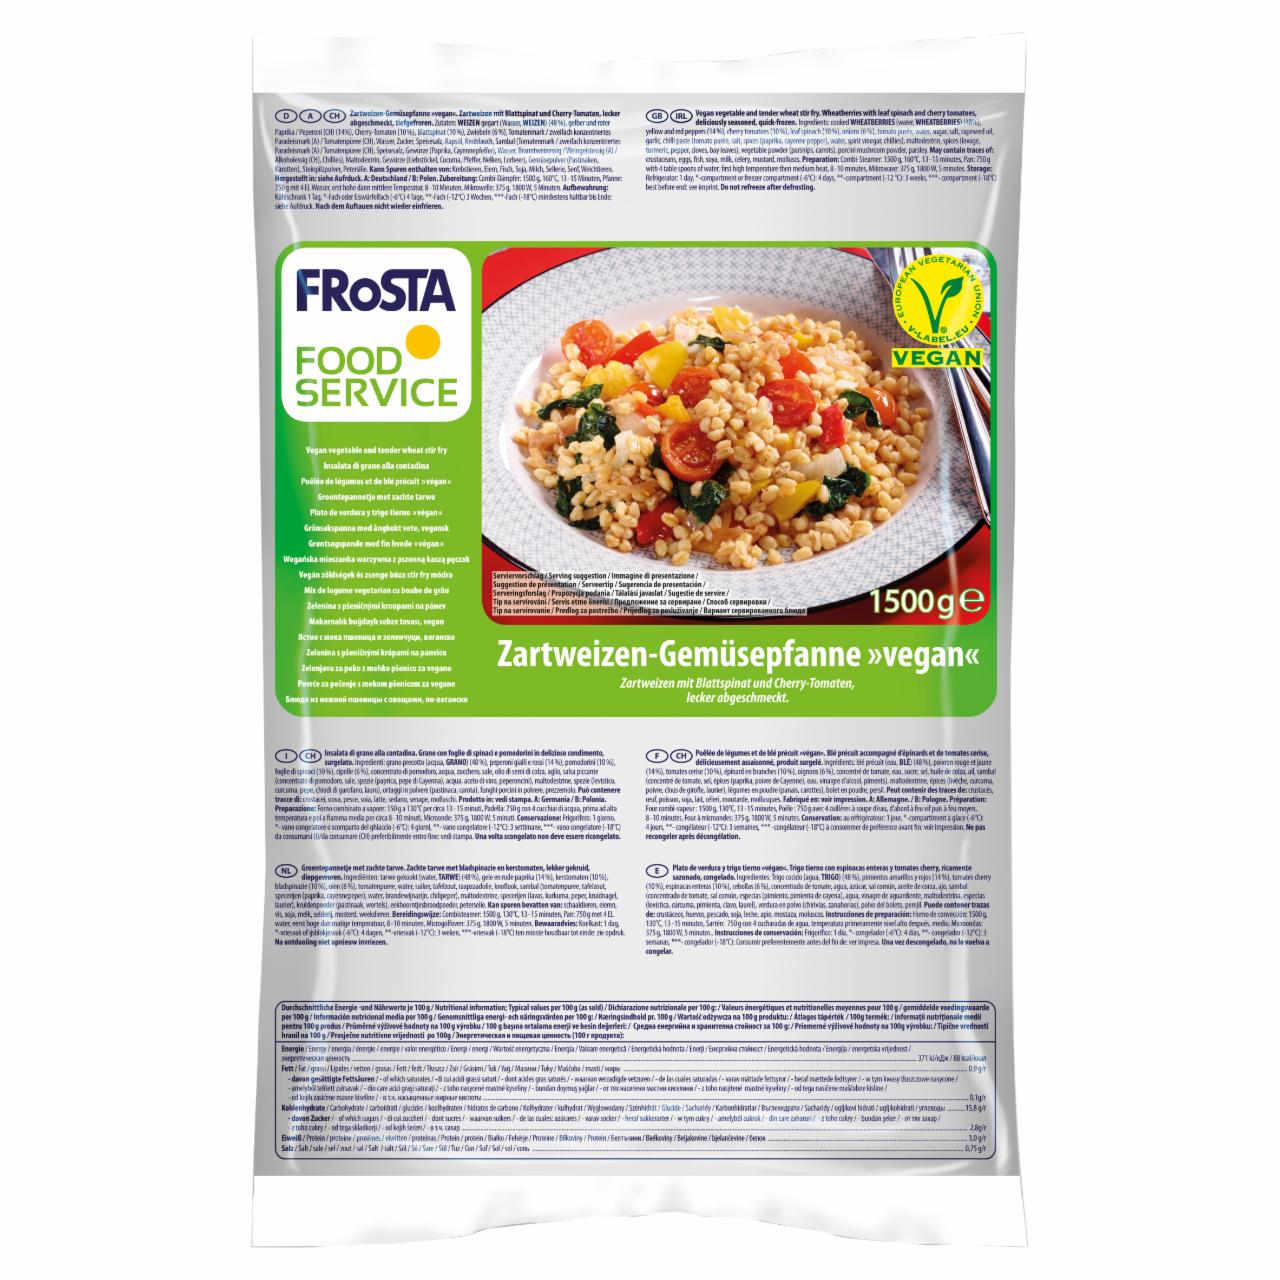 Photo - FRoSTA FFoodservice Mix of Vegetables with Pearl Barley Vegan Dish 1500 g